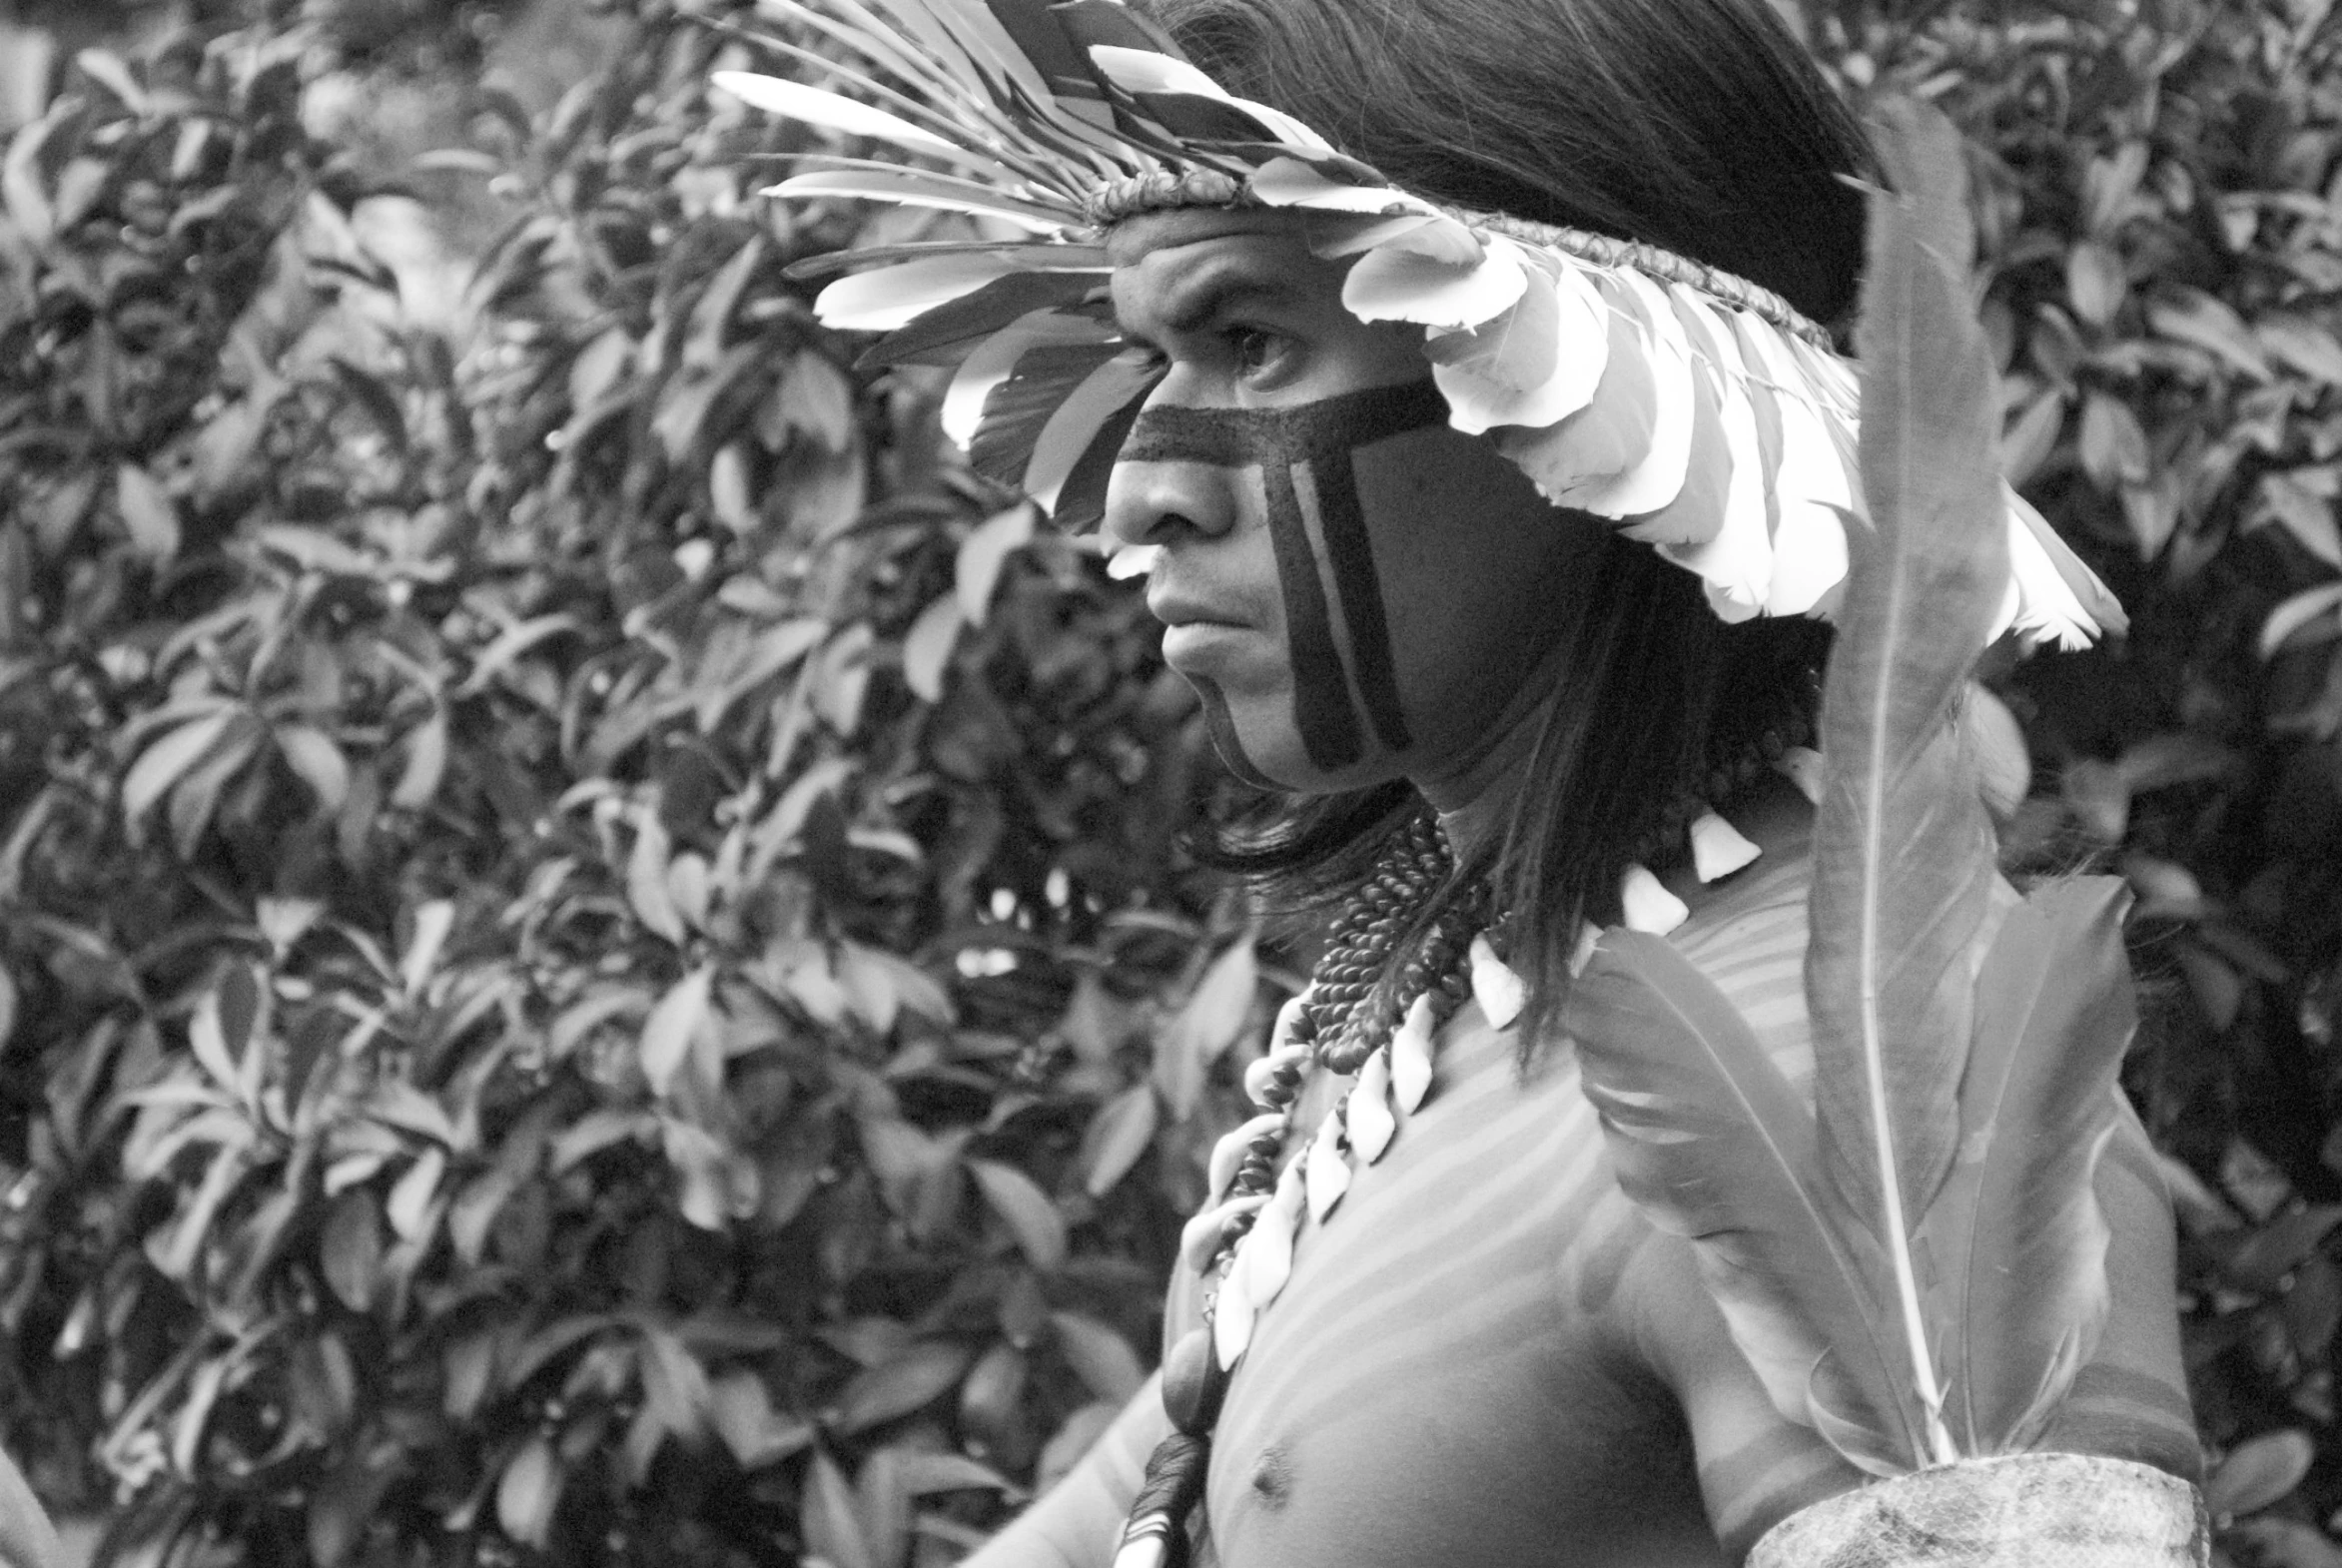 an image of a man wearing a feather head dress